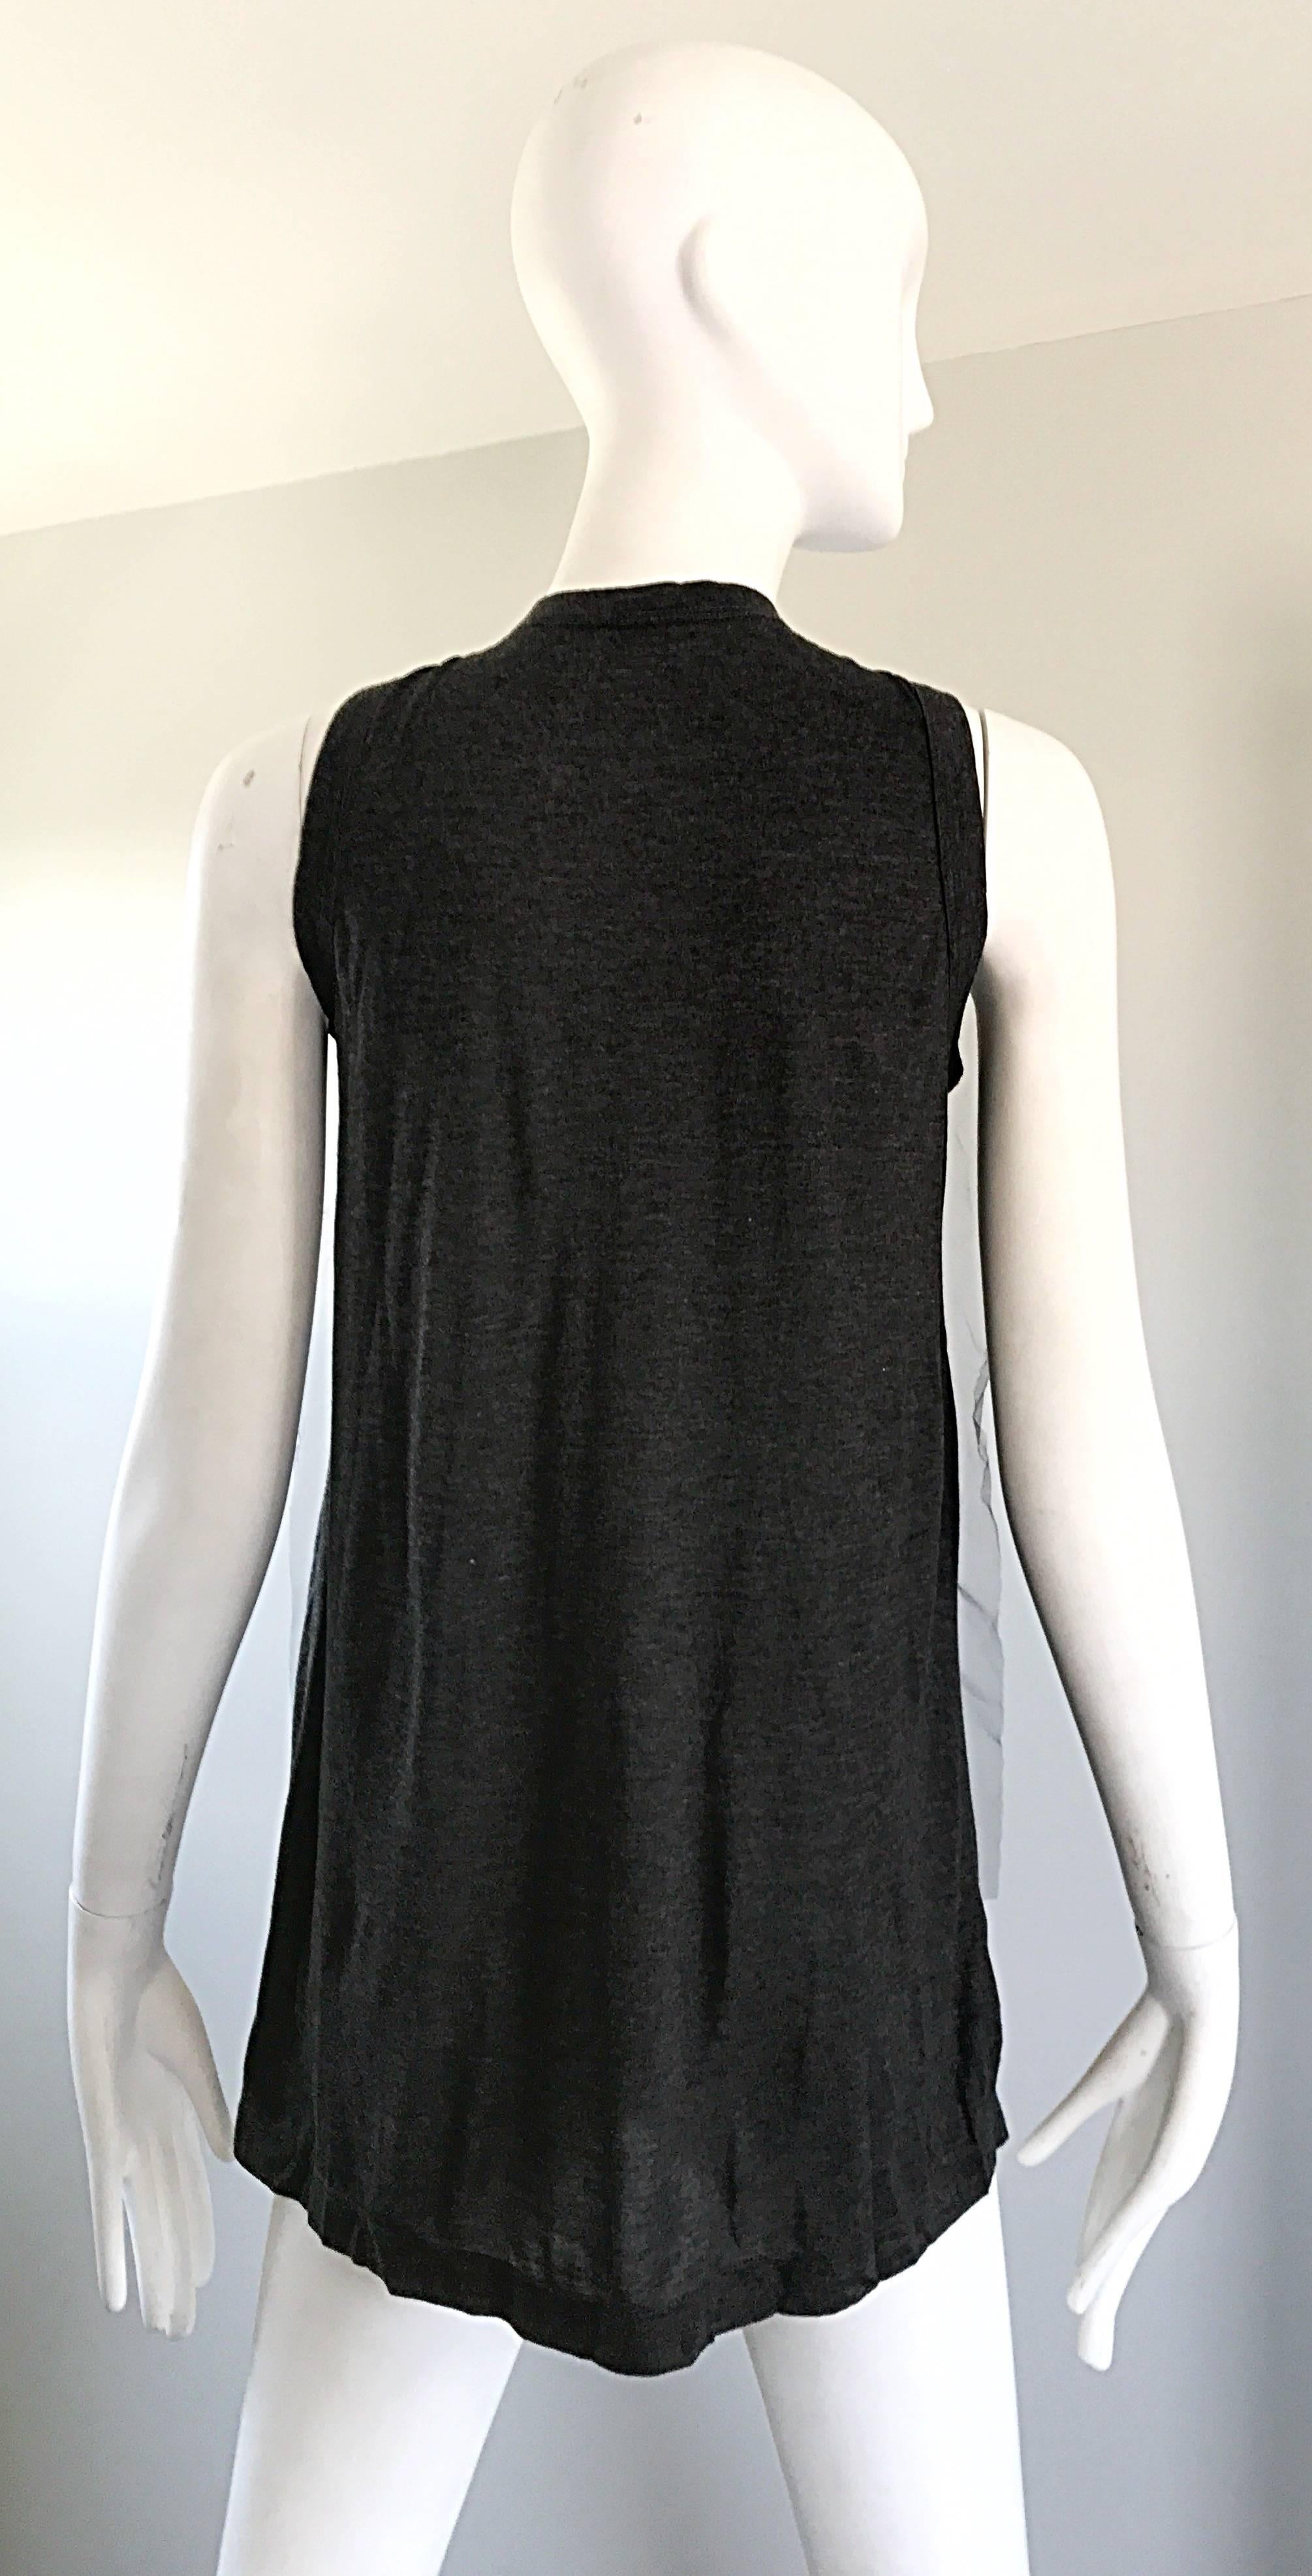 Women's 1990s Vera Wang Charcoal Gray Paillettes Tulle Sleeveless Vintage Blouse Top For Sale